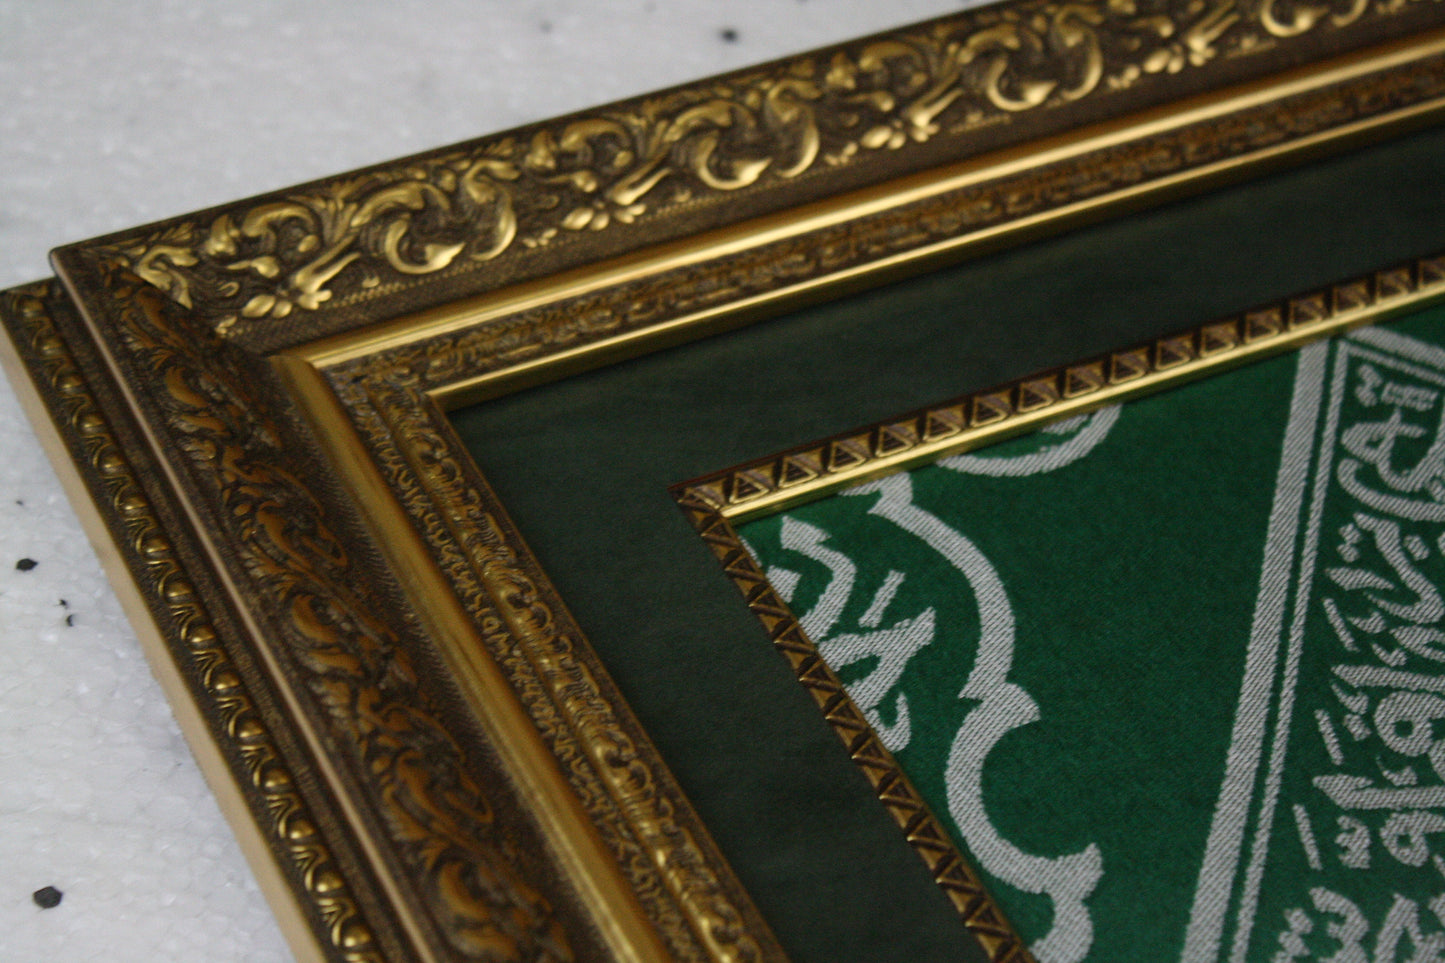 The Most Precious Meaningful Gift For Muslim Family - The Covering Cloth Of Inside Of blessed Holy Kaabah / Frame Islamic Relic Decor